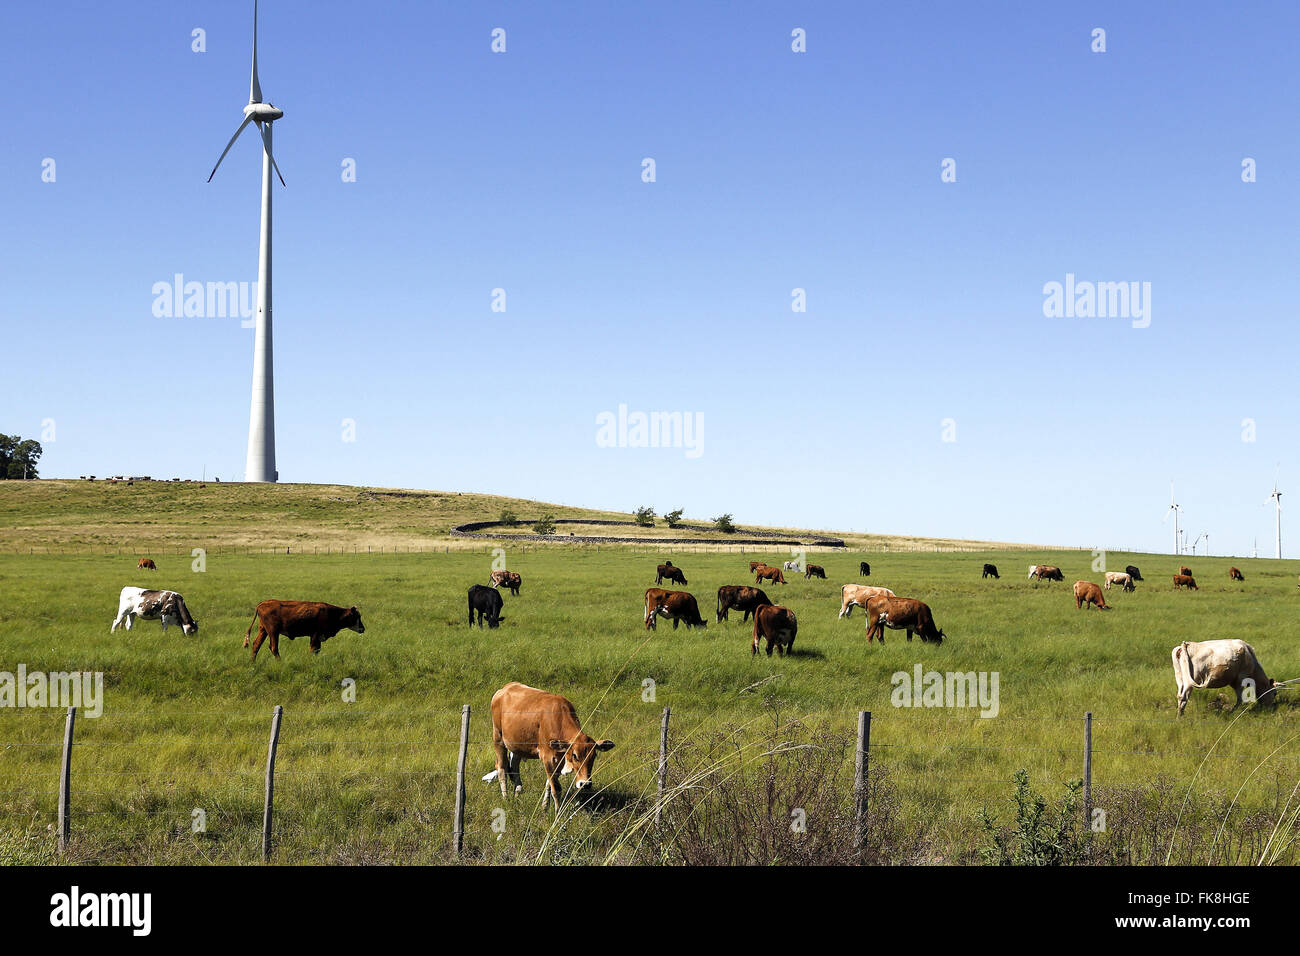 Creation of grazing animals and turbine of the Cerro Chato Eolico Park in the background Stock Photo